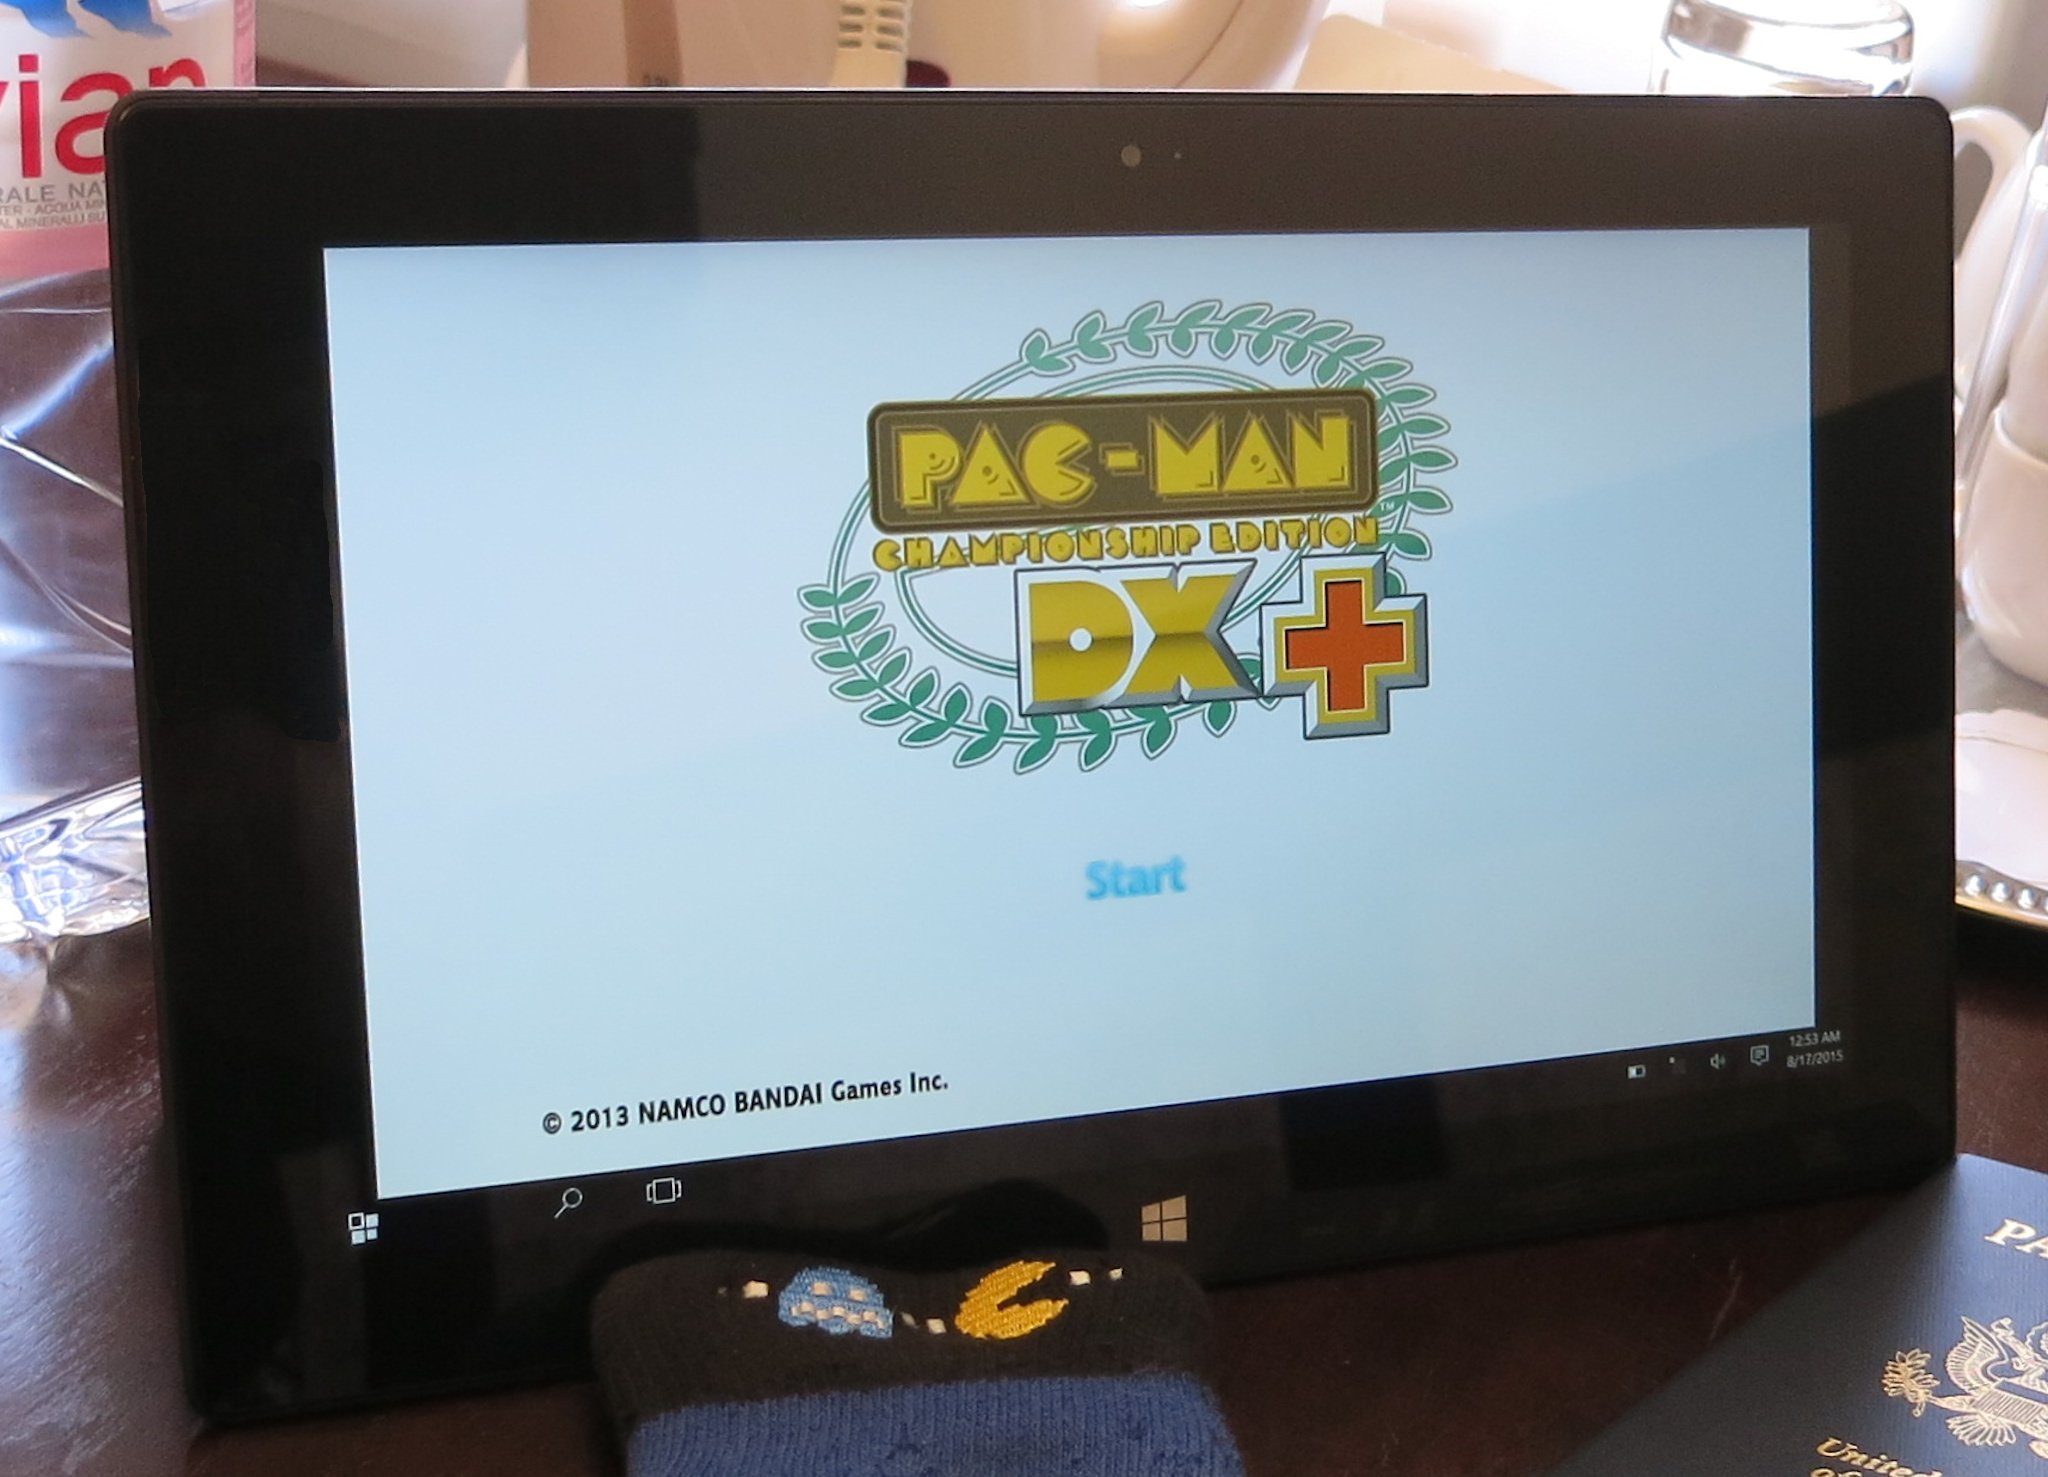 Best-arcade-games-for-Windows-10-Pac-Man-Championship-Edition-DX-Surface-Pro-photo.jpg